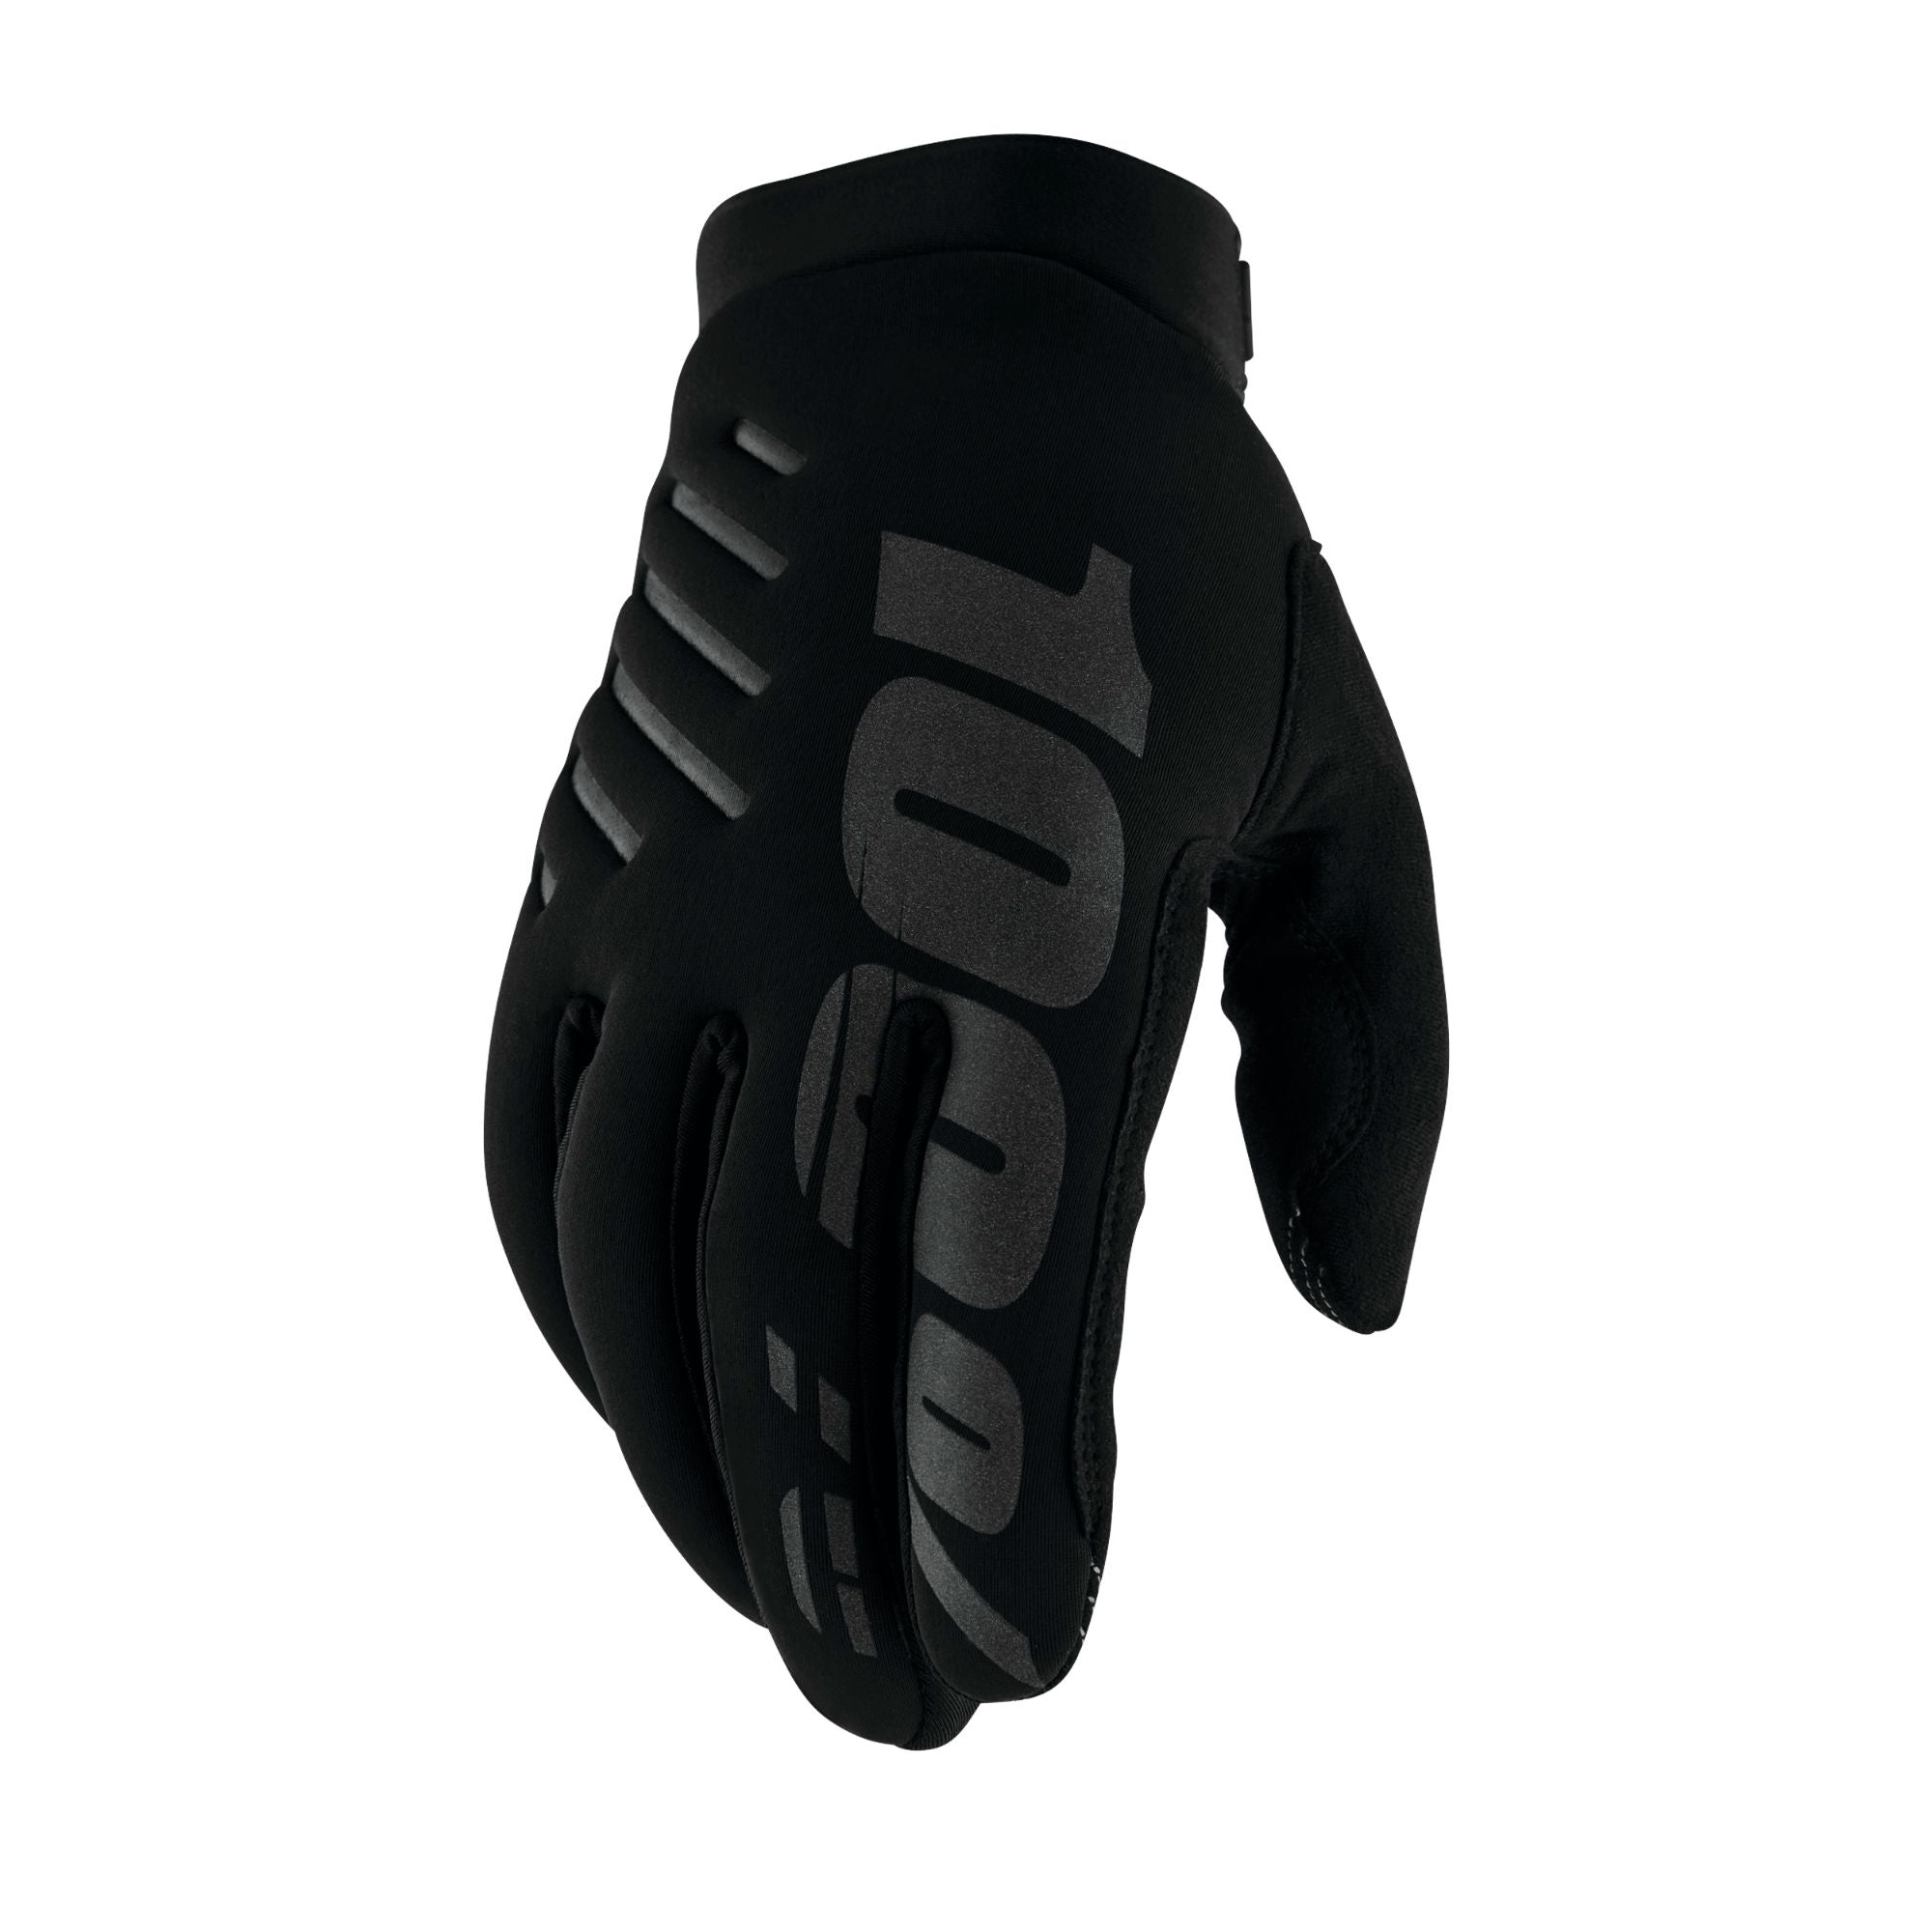 Kid's Full Finger Cycling Gloves 100% Brisker Youth AW22 Cold Weather Black X Large